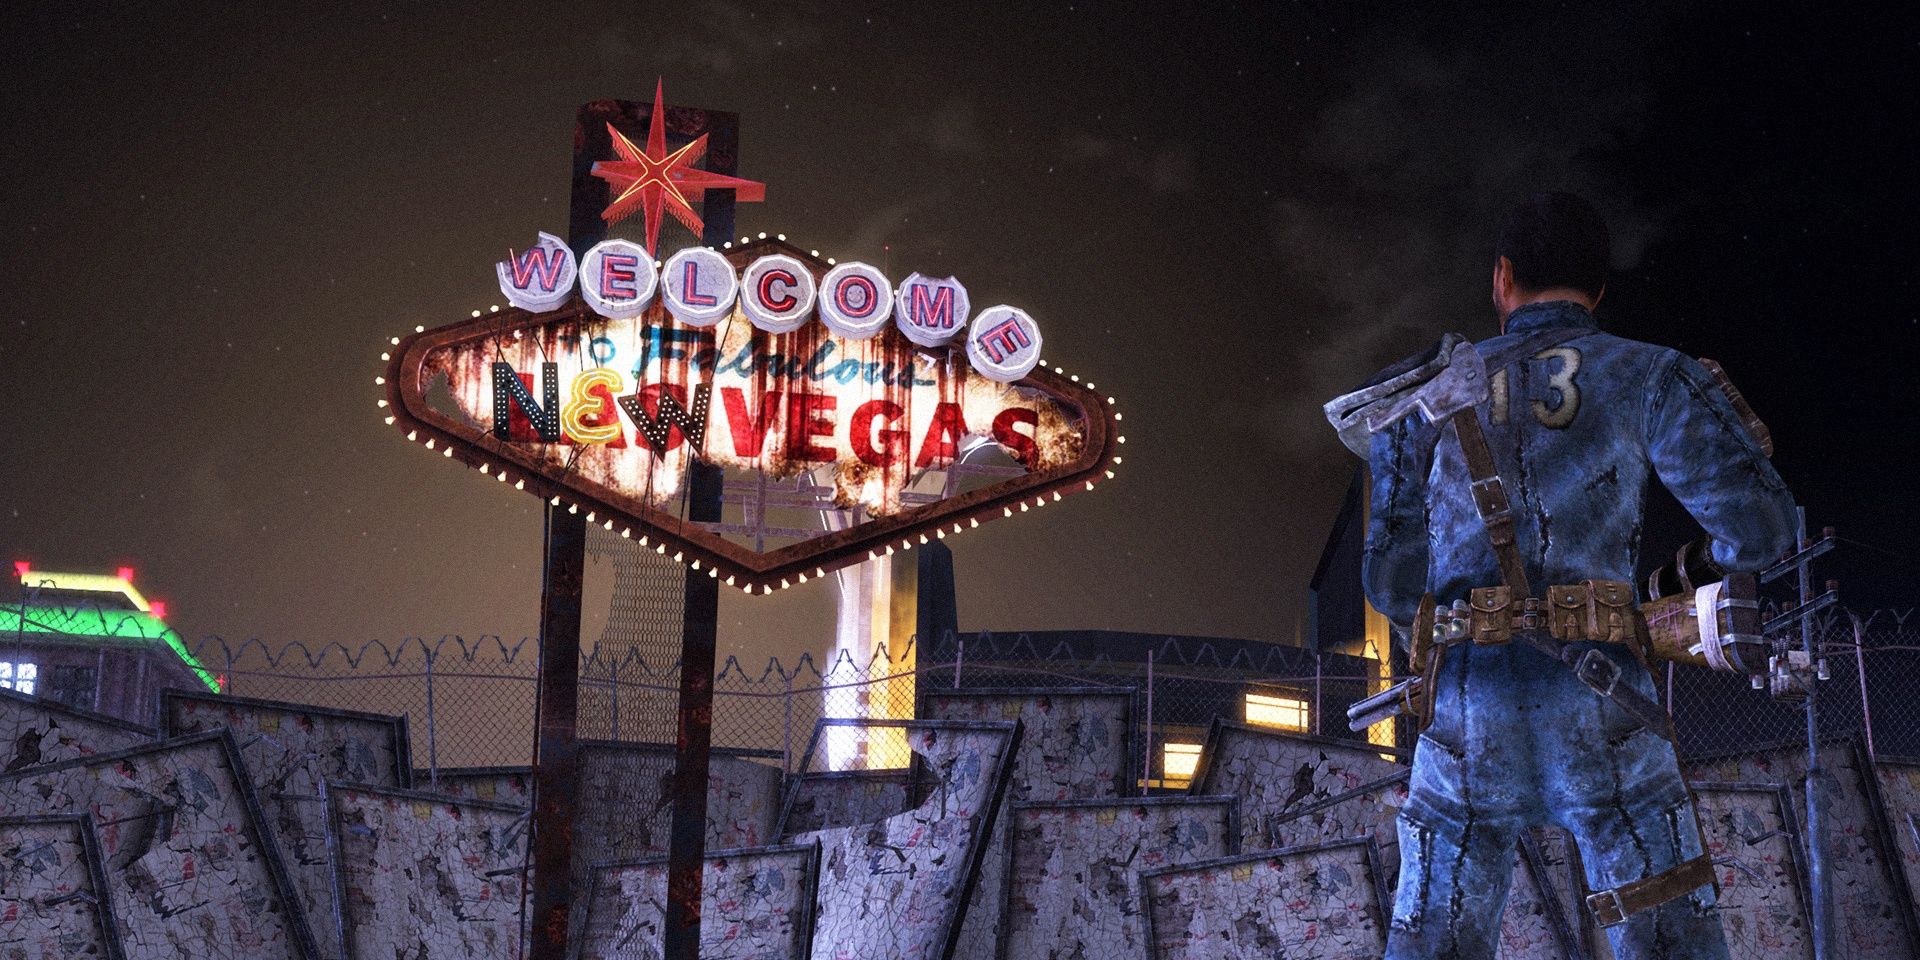 A screenshot showing the Welcome to New Vegas sign in Fallout: New Vegas